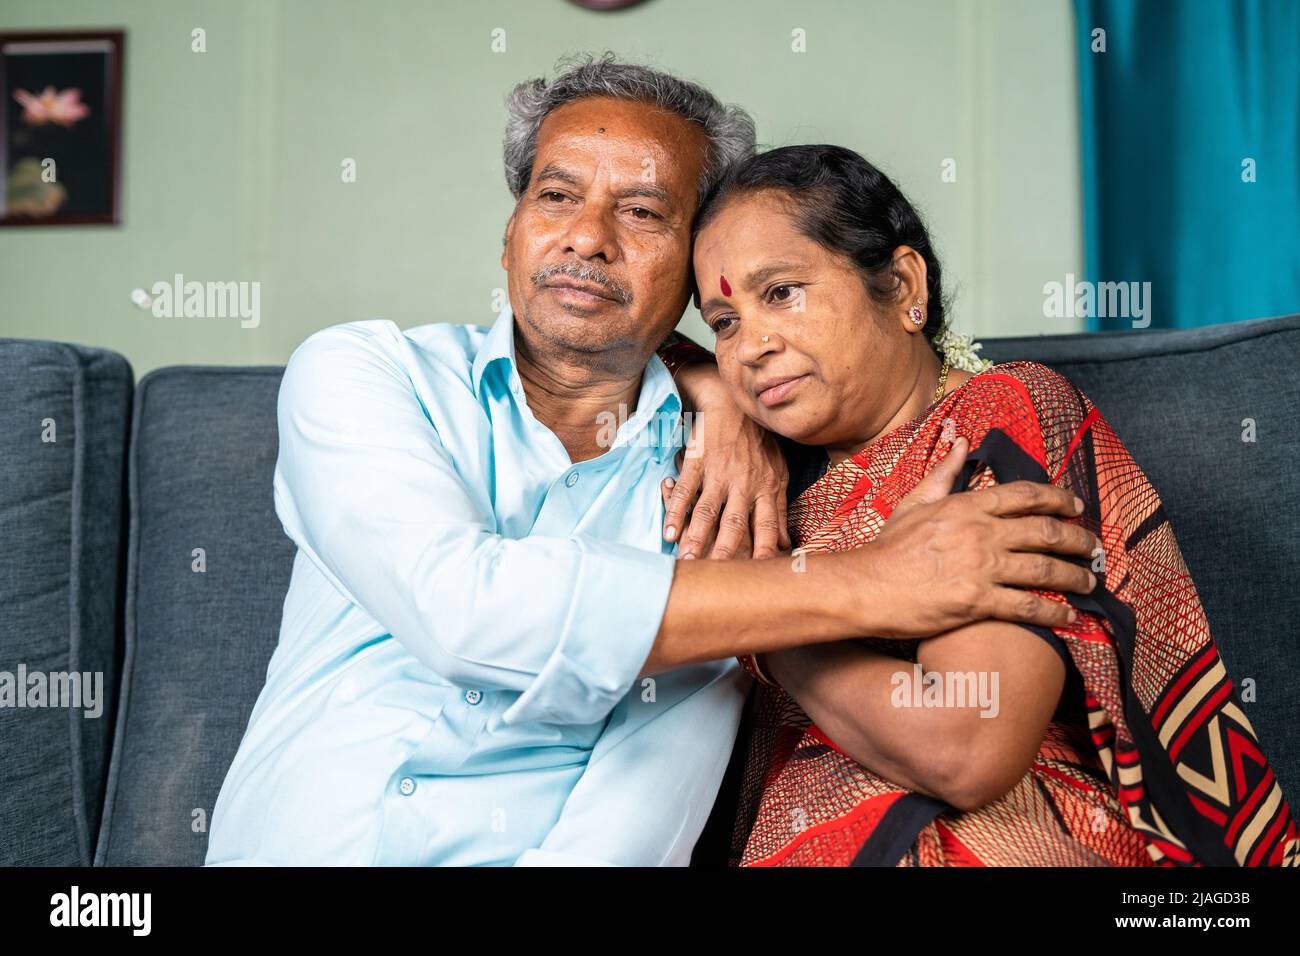 Senior man consoles by embracing his thouhgtful wife at home while on sitting sofa - concept of family, emotional love and support Stock Photo